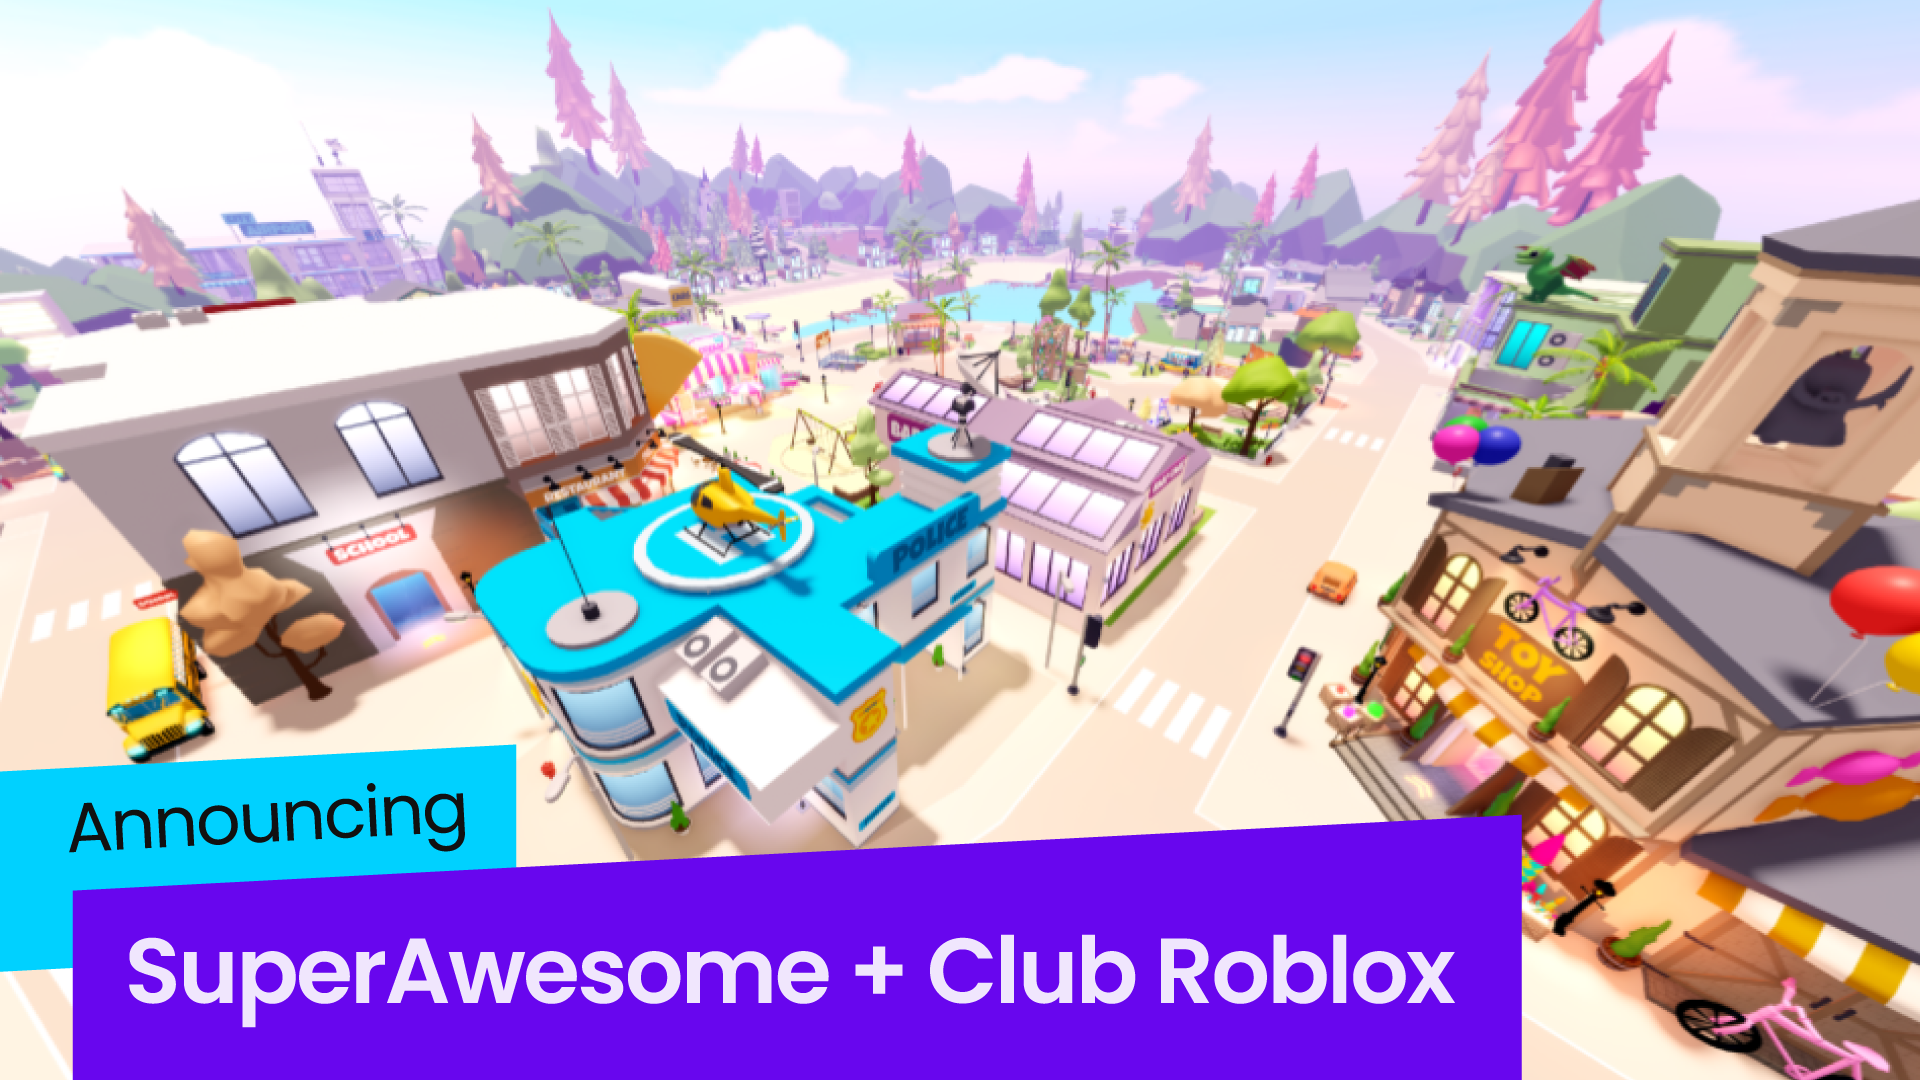 Good games with Premium Benefits? : r/roblox